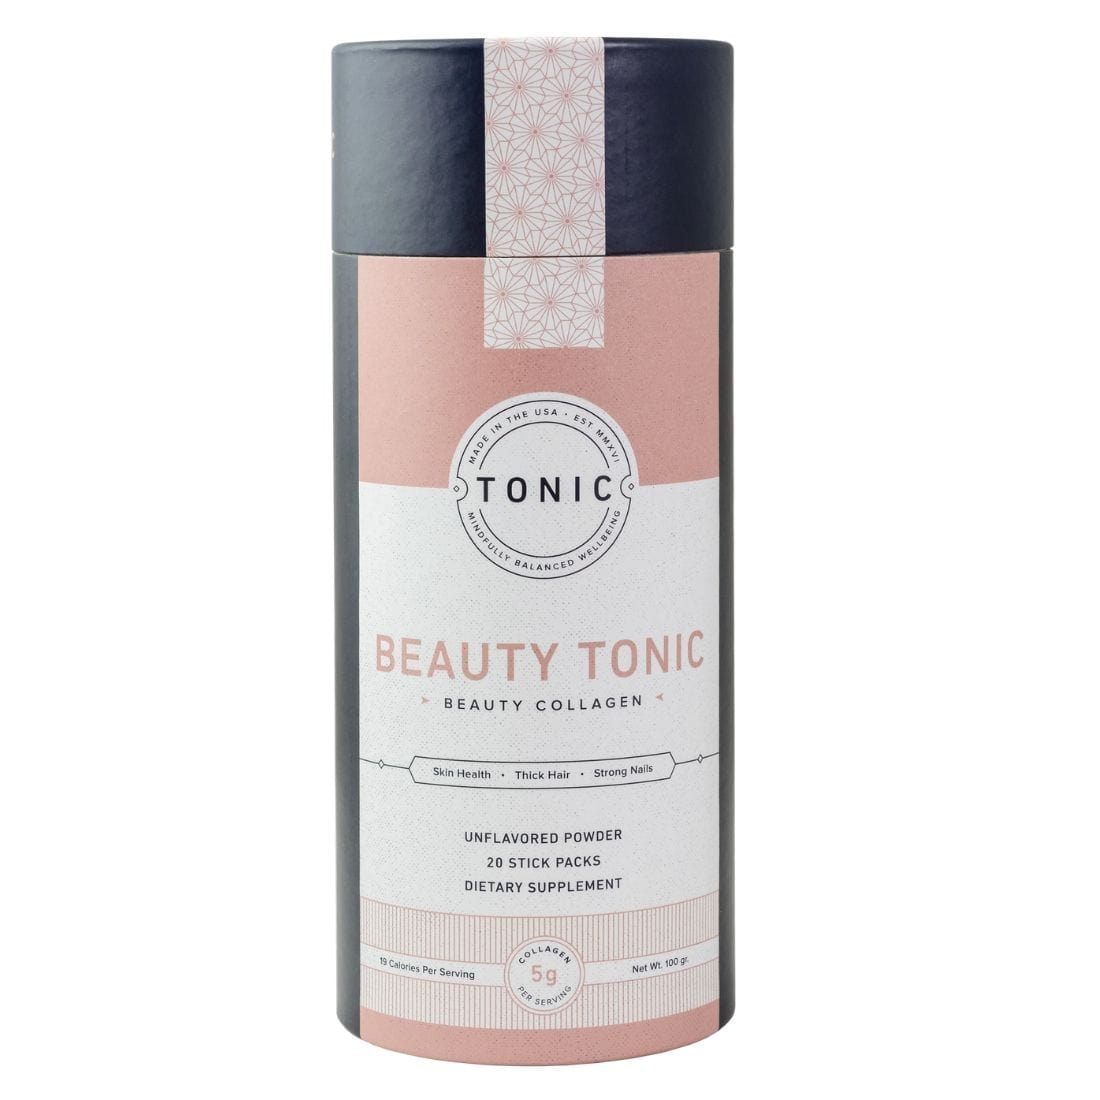 Tonic Products Beauty Tonic Beauty Collagen, 20 Stick Packs (5 grams each)